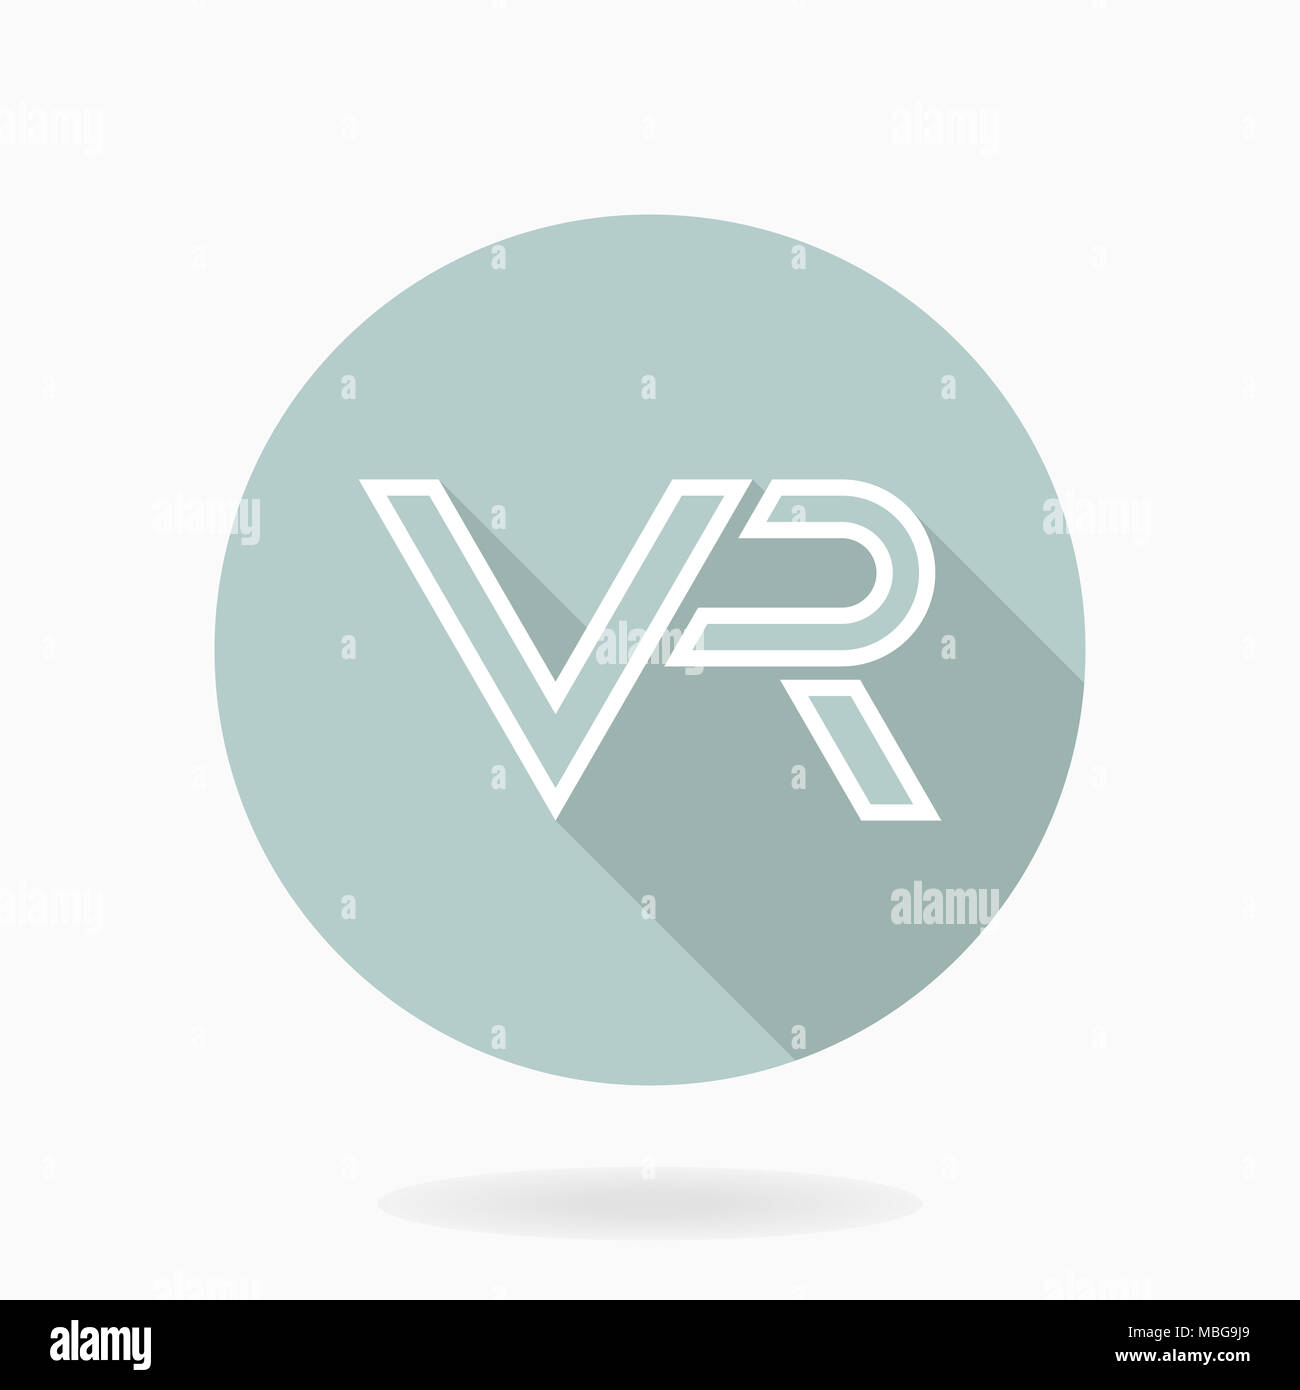 White icon with VR logo in the blue circle. Flat design with long shadow. Virtual reality logo Stock Photo